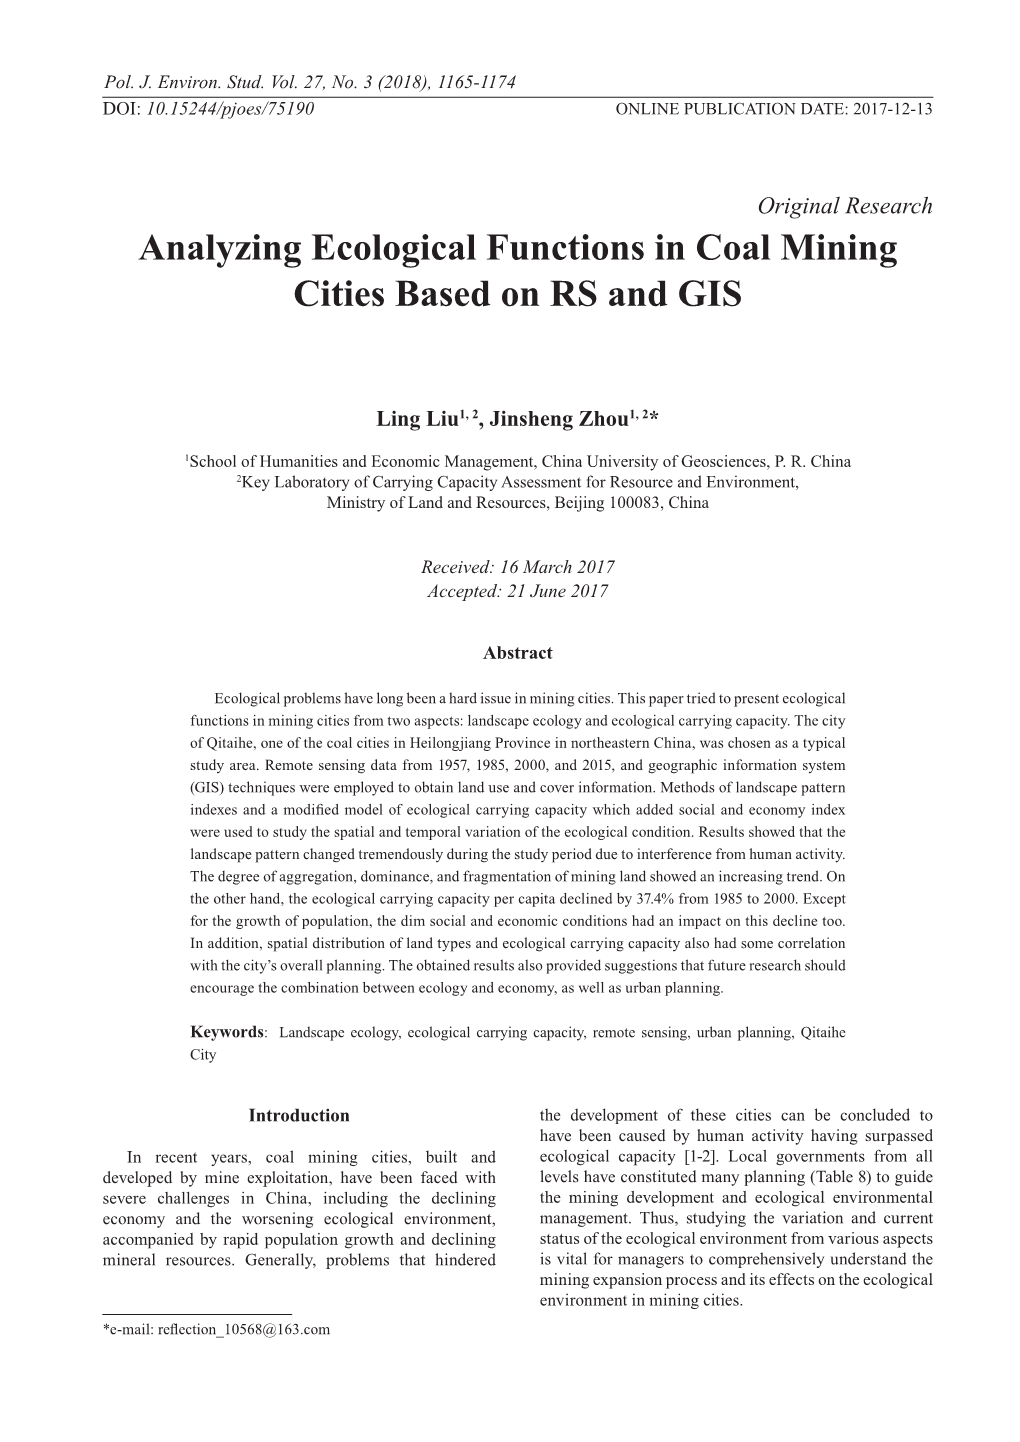 Analyzing Ecological Functions in Coal Mining Cities Based on RS and GIS